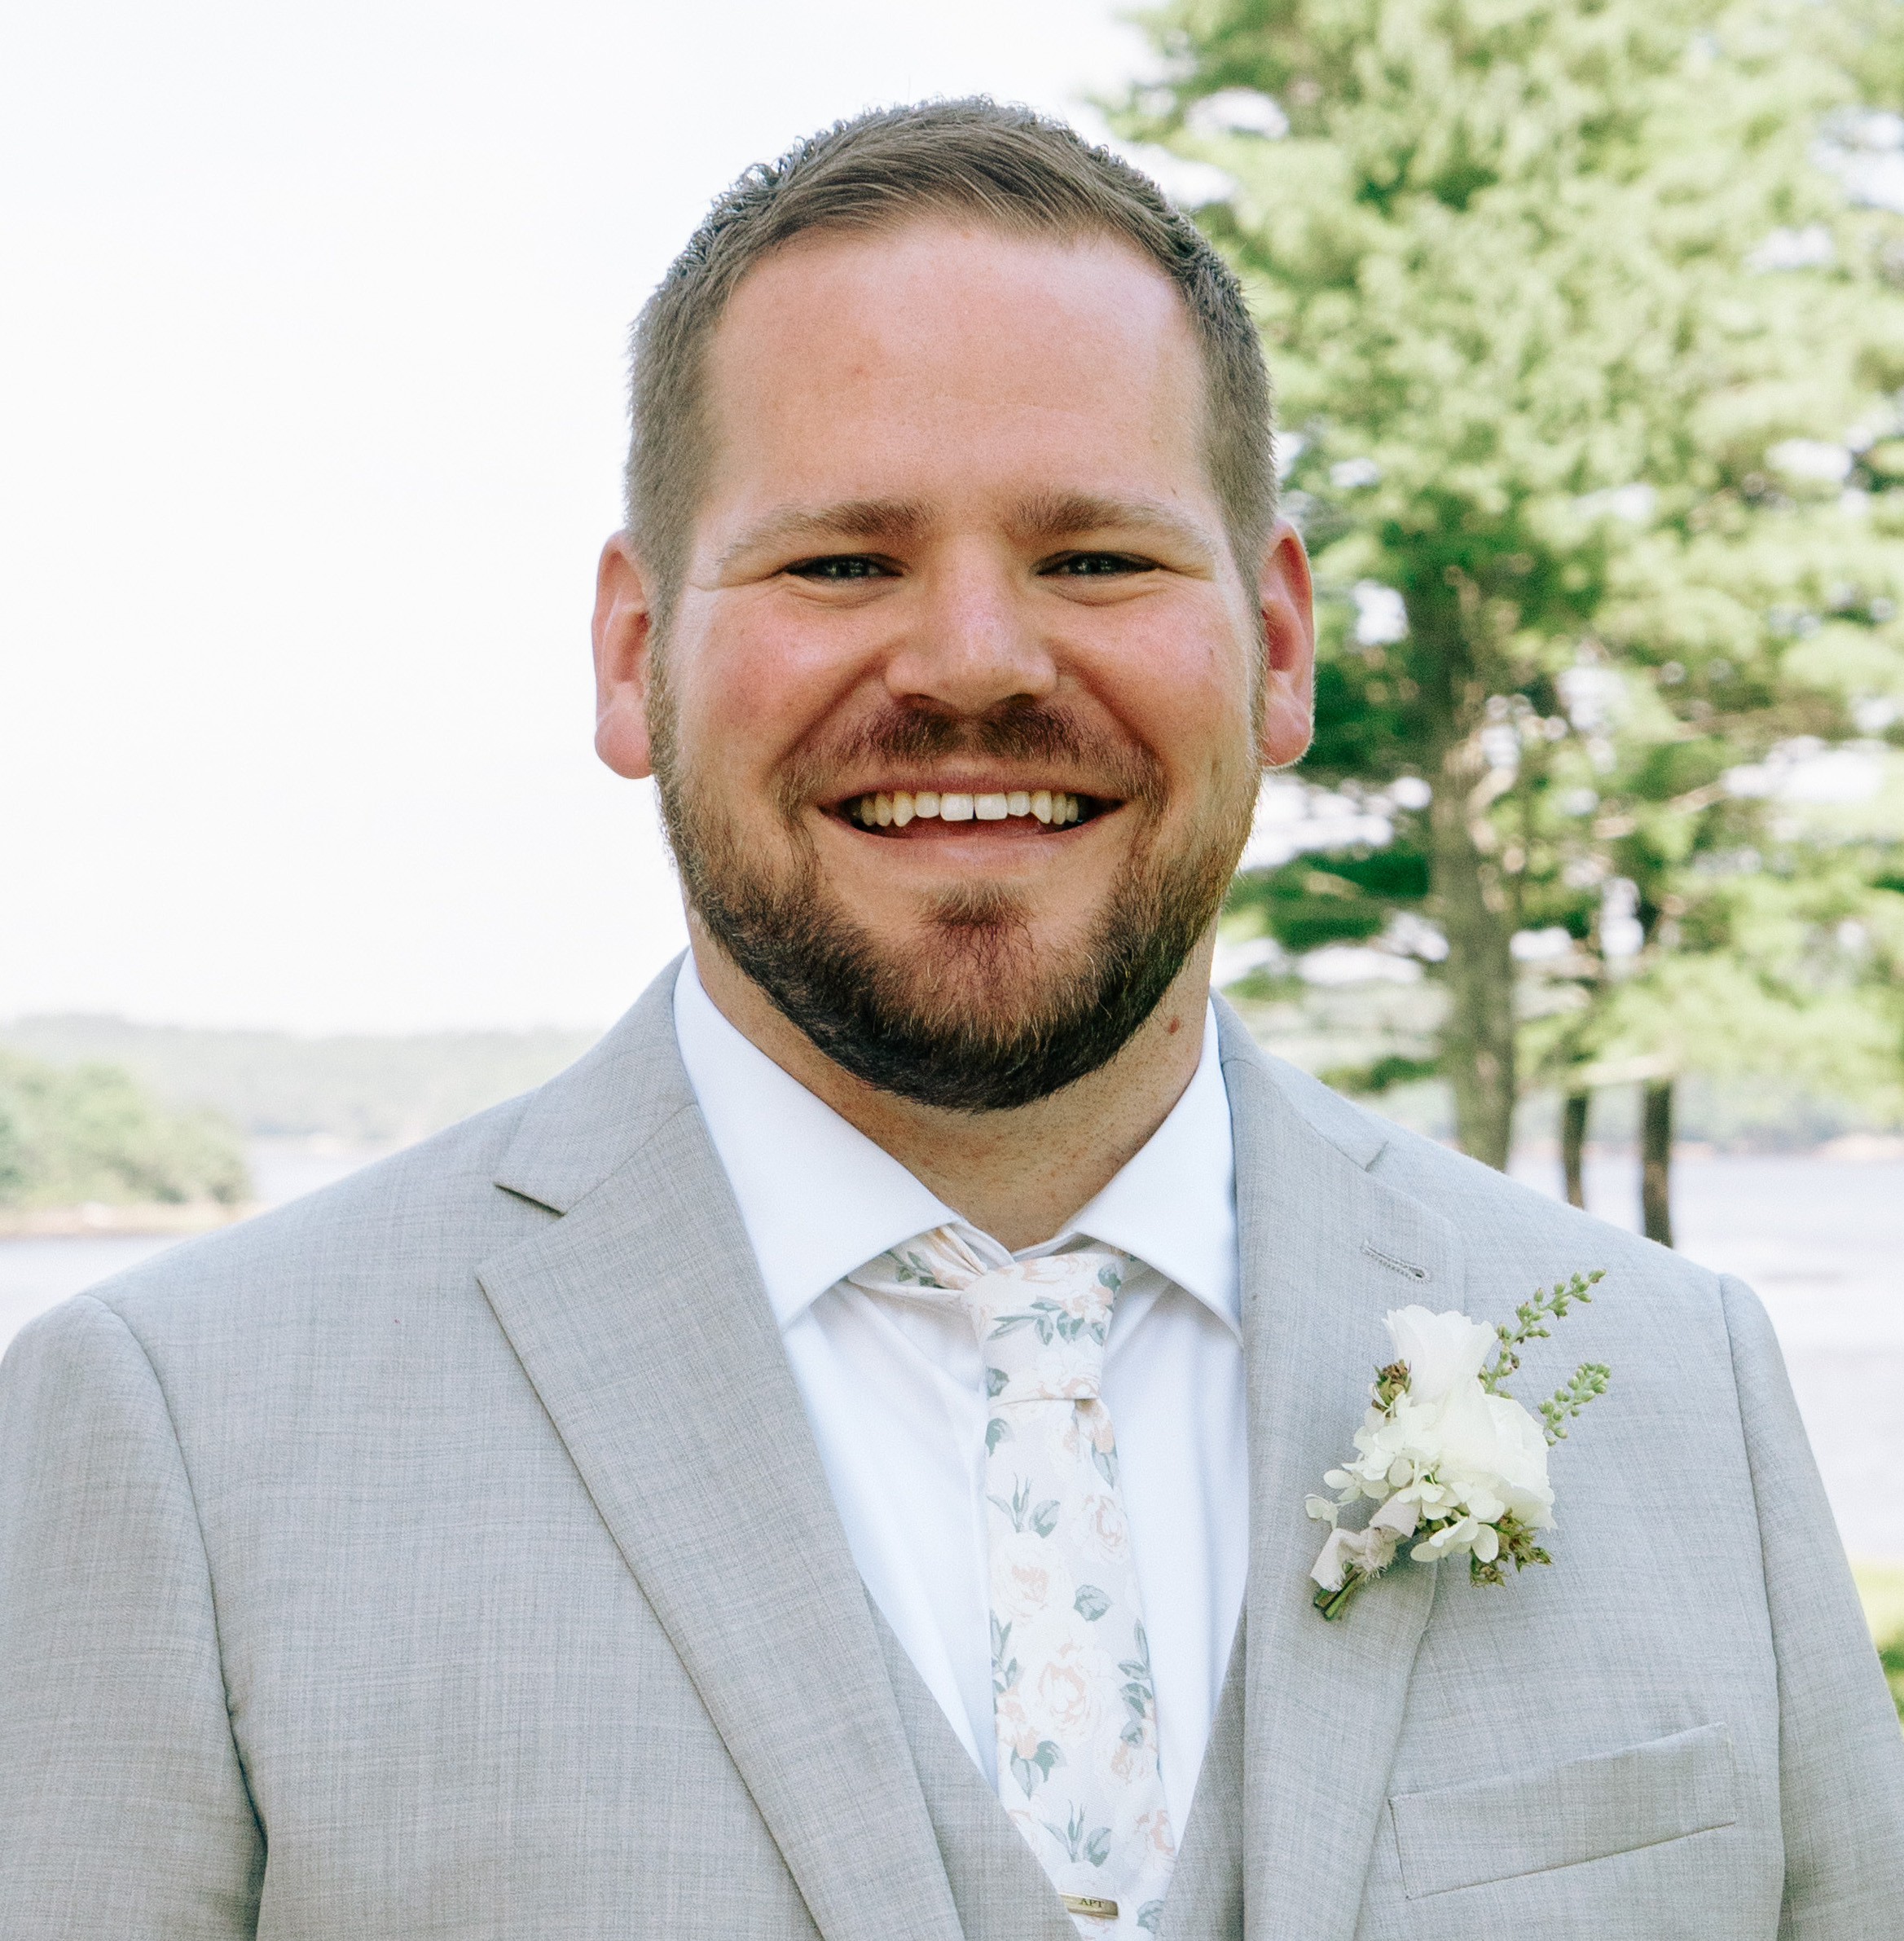 Photo of Andy Towne. He's wearing a pale coloured suit with a white shirt and patterned white tie, and a white flower arrangement in his button hole. He's a white man with short blonde hair and a beard and moustache. He's smiling at the camera with trees in the background.